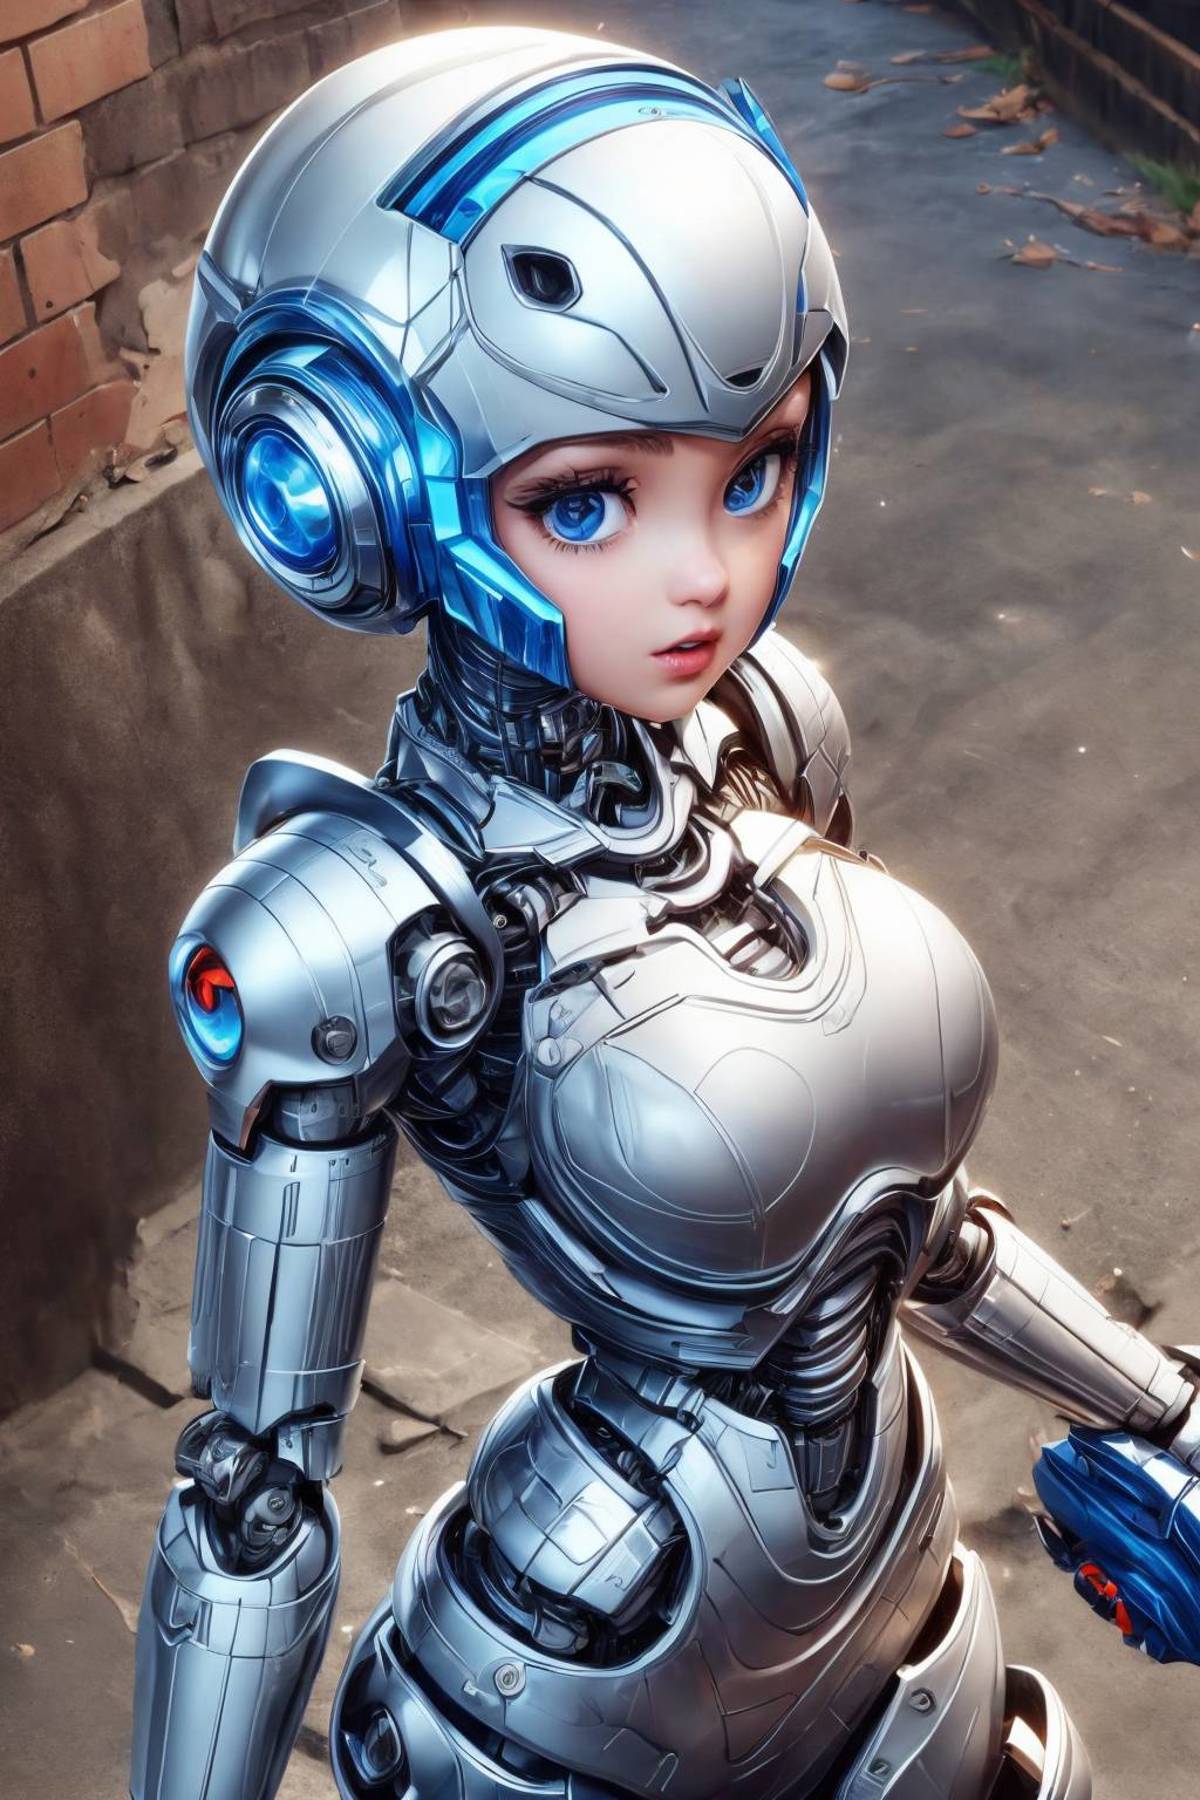 AI model image by slime77744784